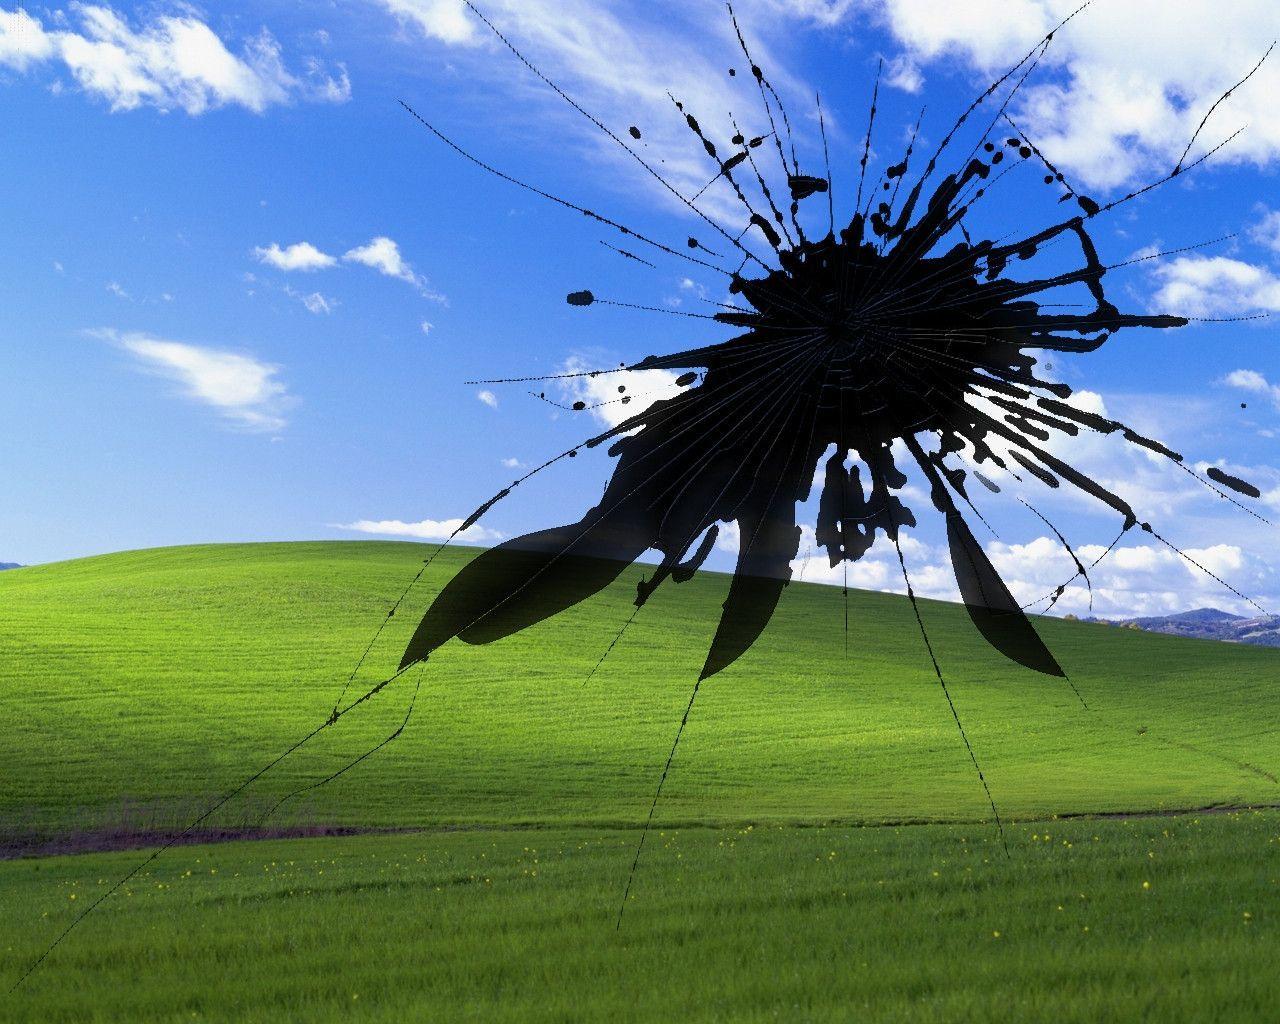 cool cracked windows backgrounds